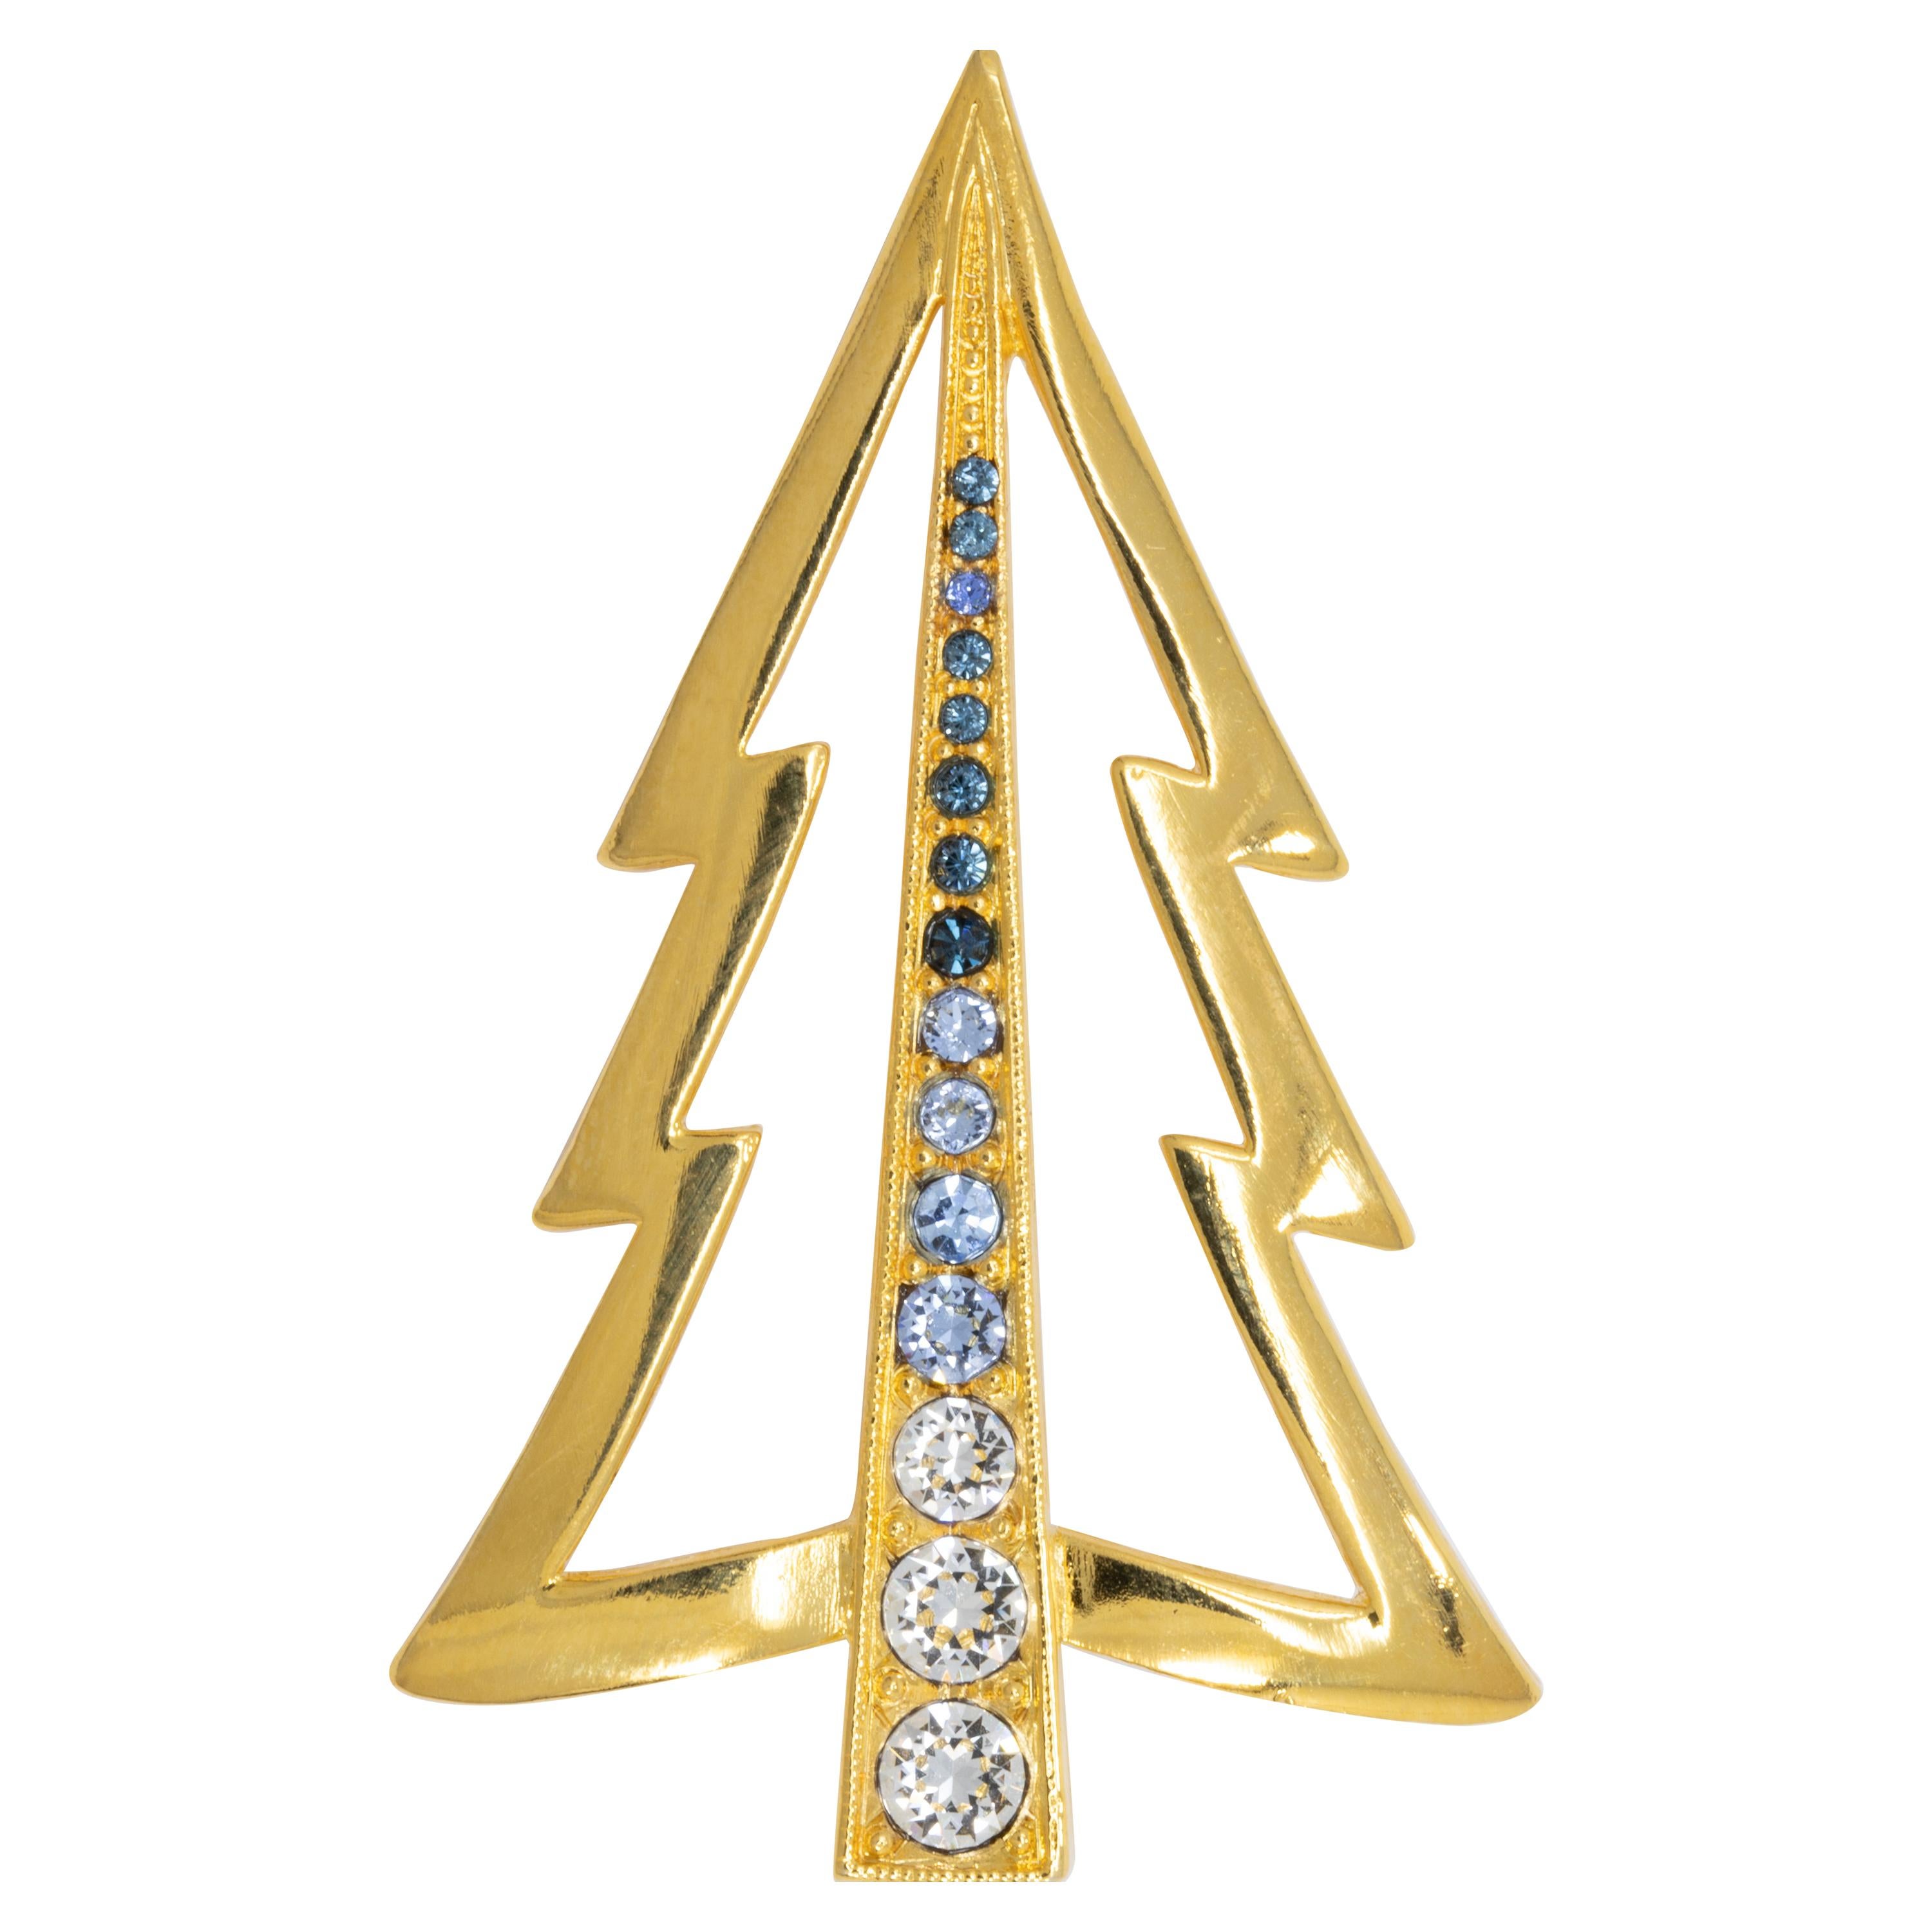 LIA Retro Gold Christmas Tree Pin Brooch with Crystals